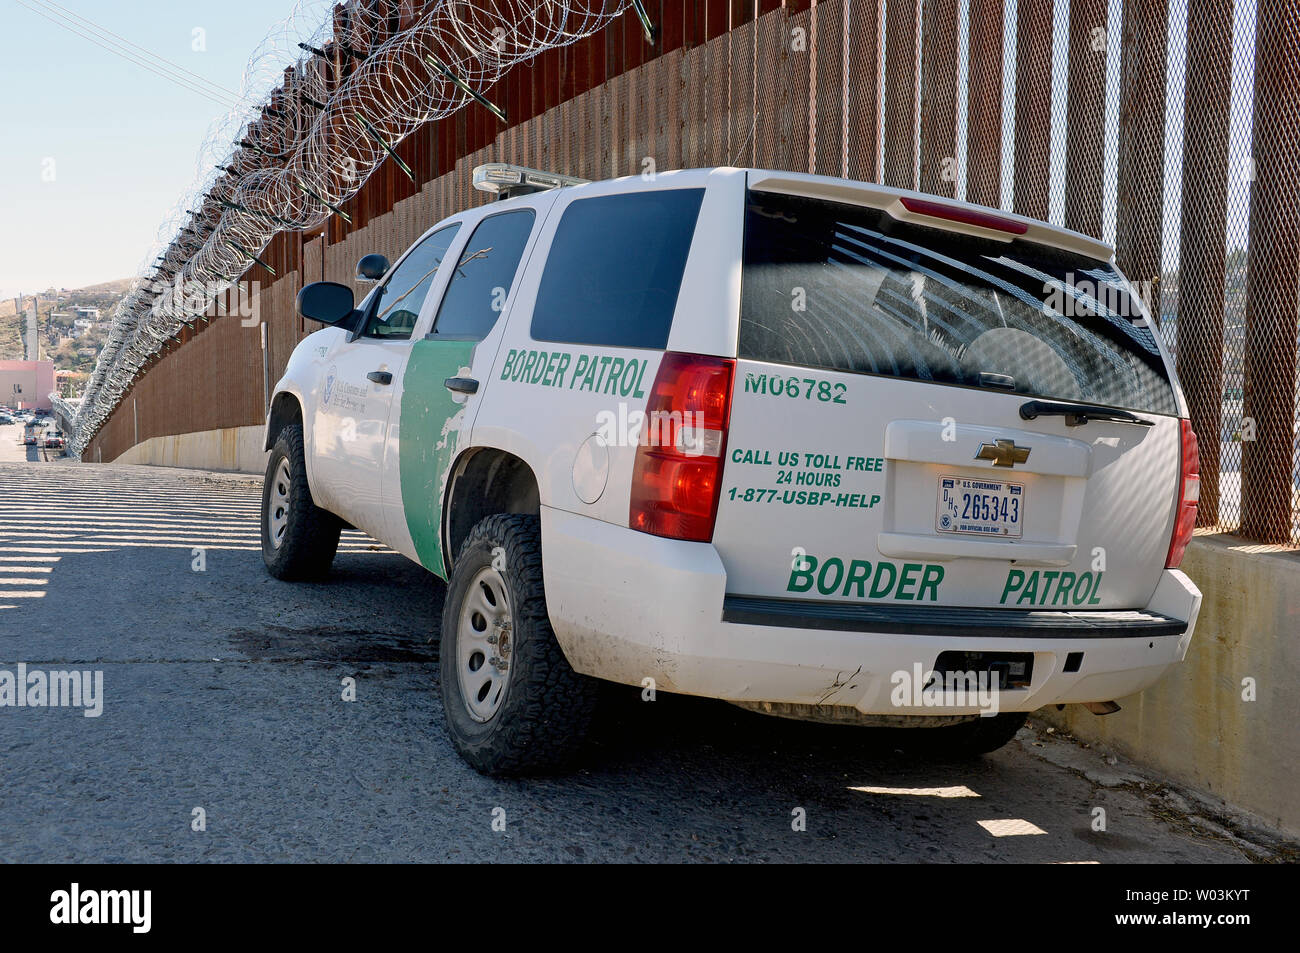 https://c8.alamy.com/comp/W03KYT/a-united-states-border-patrol-truck-sits-in-the-shadow-of-the-border-fence-which-is-adorned-with-barbed-wire-on-its-top-in-nogales-arizona-february-8-2019-the-arizona-city-has-ordered-federal-officials-to-remove-the-razor-wire-was-placed-at-the-top-and-bottom-of-the-fence-photo-by-art-foxallupi-W03KYT.jpg